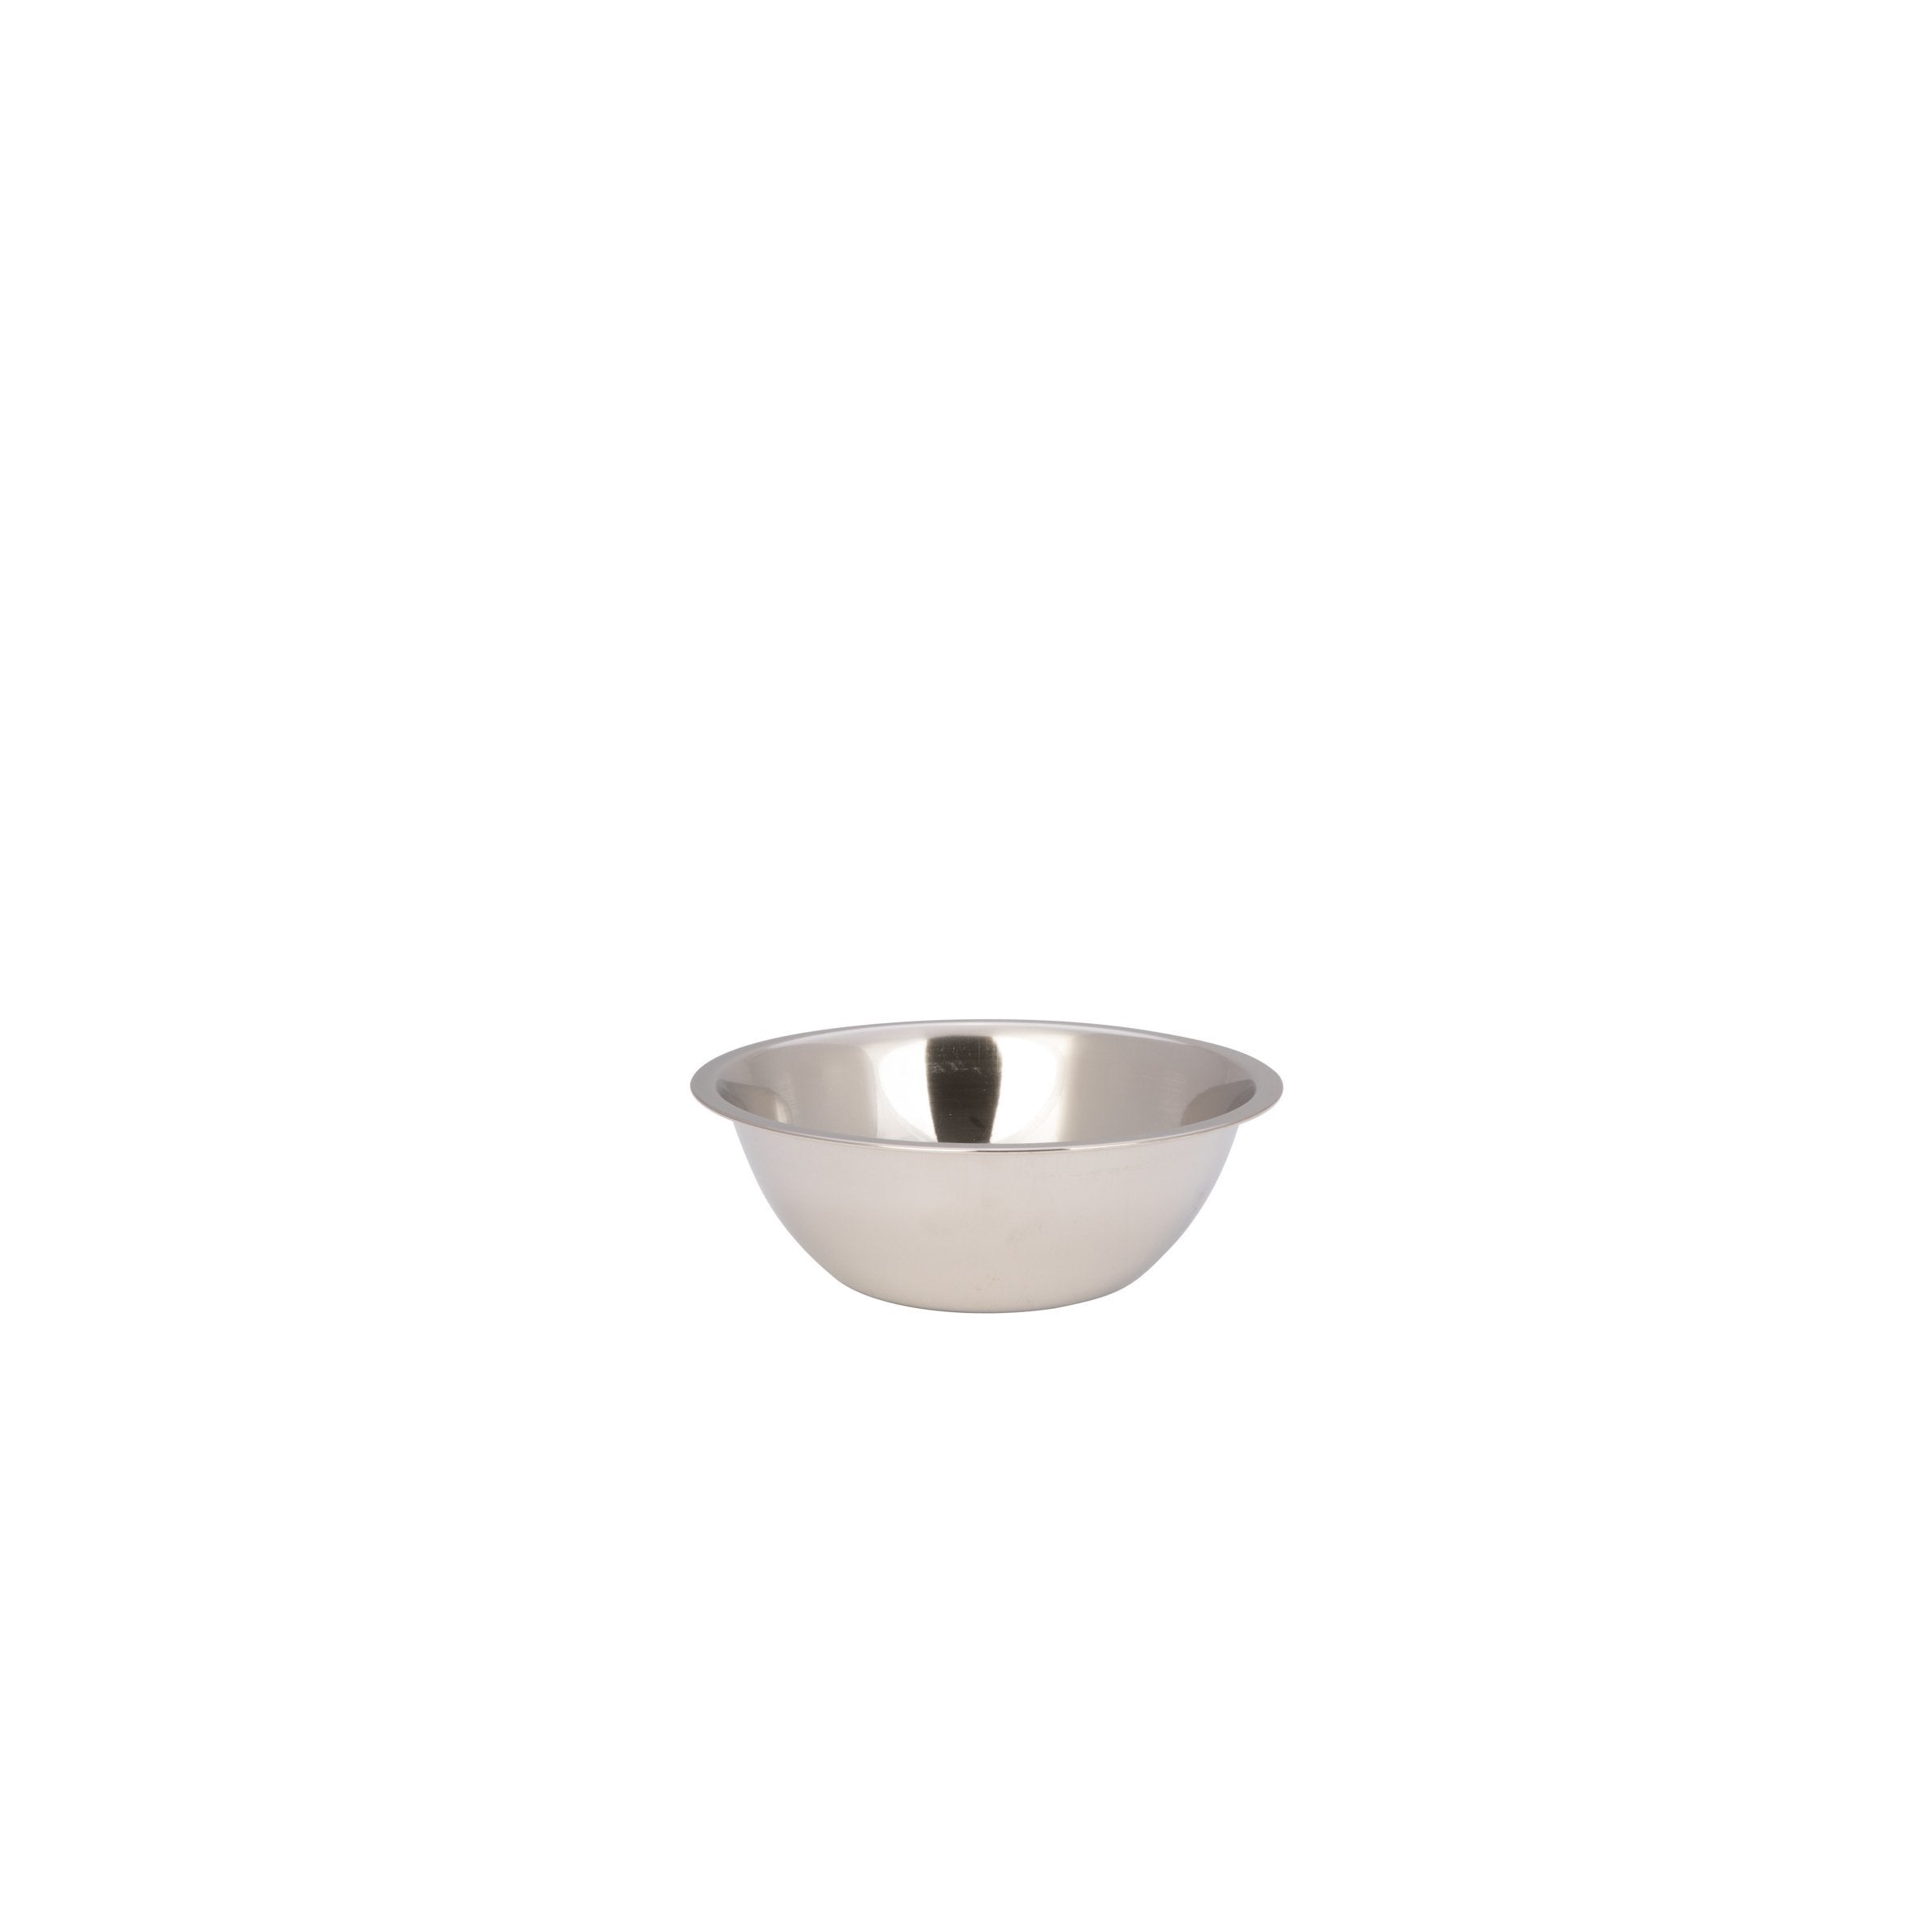 Excellante 16 quart mixing bowl, heavy duty, stainless steel, 22 gauge (0.8  mm), comes in each 